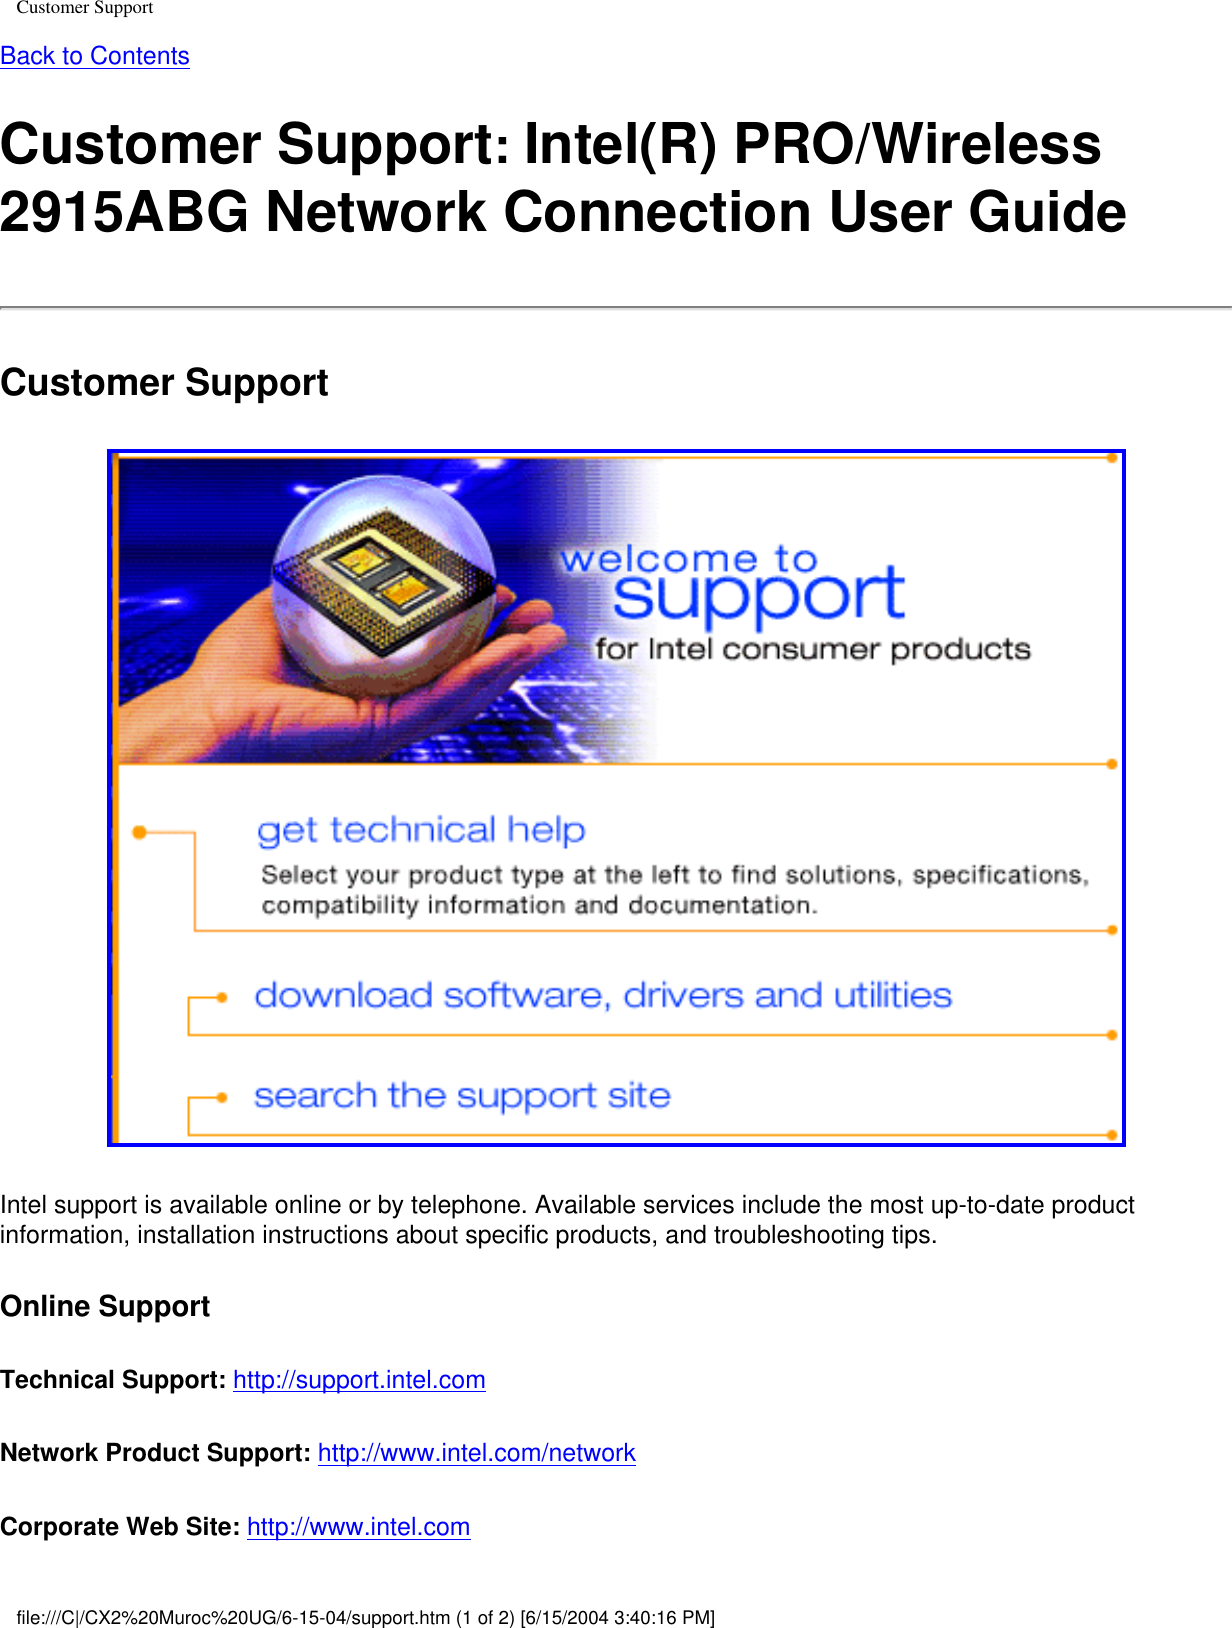 Customer SupportBack to ContentsCustomer Support: Intel(R) PRO/Wireless 2915ABG Network Connection User GuideCustomer Support Intel support is available online or by telephone. Available services include the most up-to-date product information, installation instructions about specific products, and troubleshooting tips. Online SupportTechnical Support: http://support.intel.com Network Product Support: http://www.intel.com/network Corporate Web Site: http://www.intel.com file:///C|/CX2%20Muroc%20UG/6-15-04/support.htm (1 of 2) [6/15/2004 3:40:16 PM]